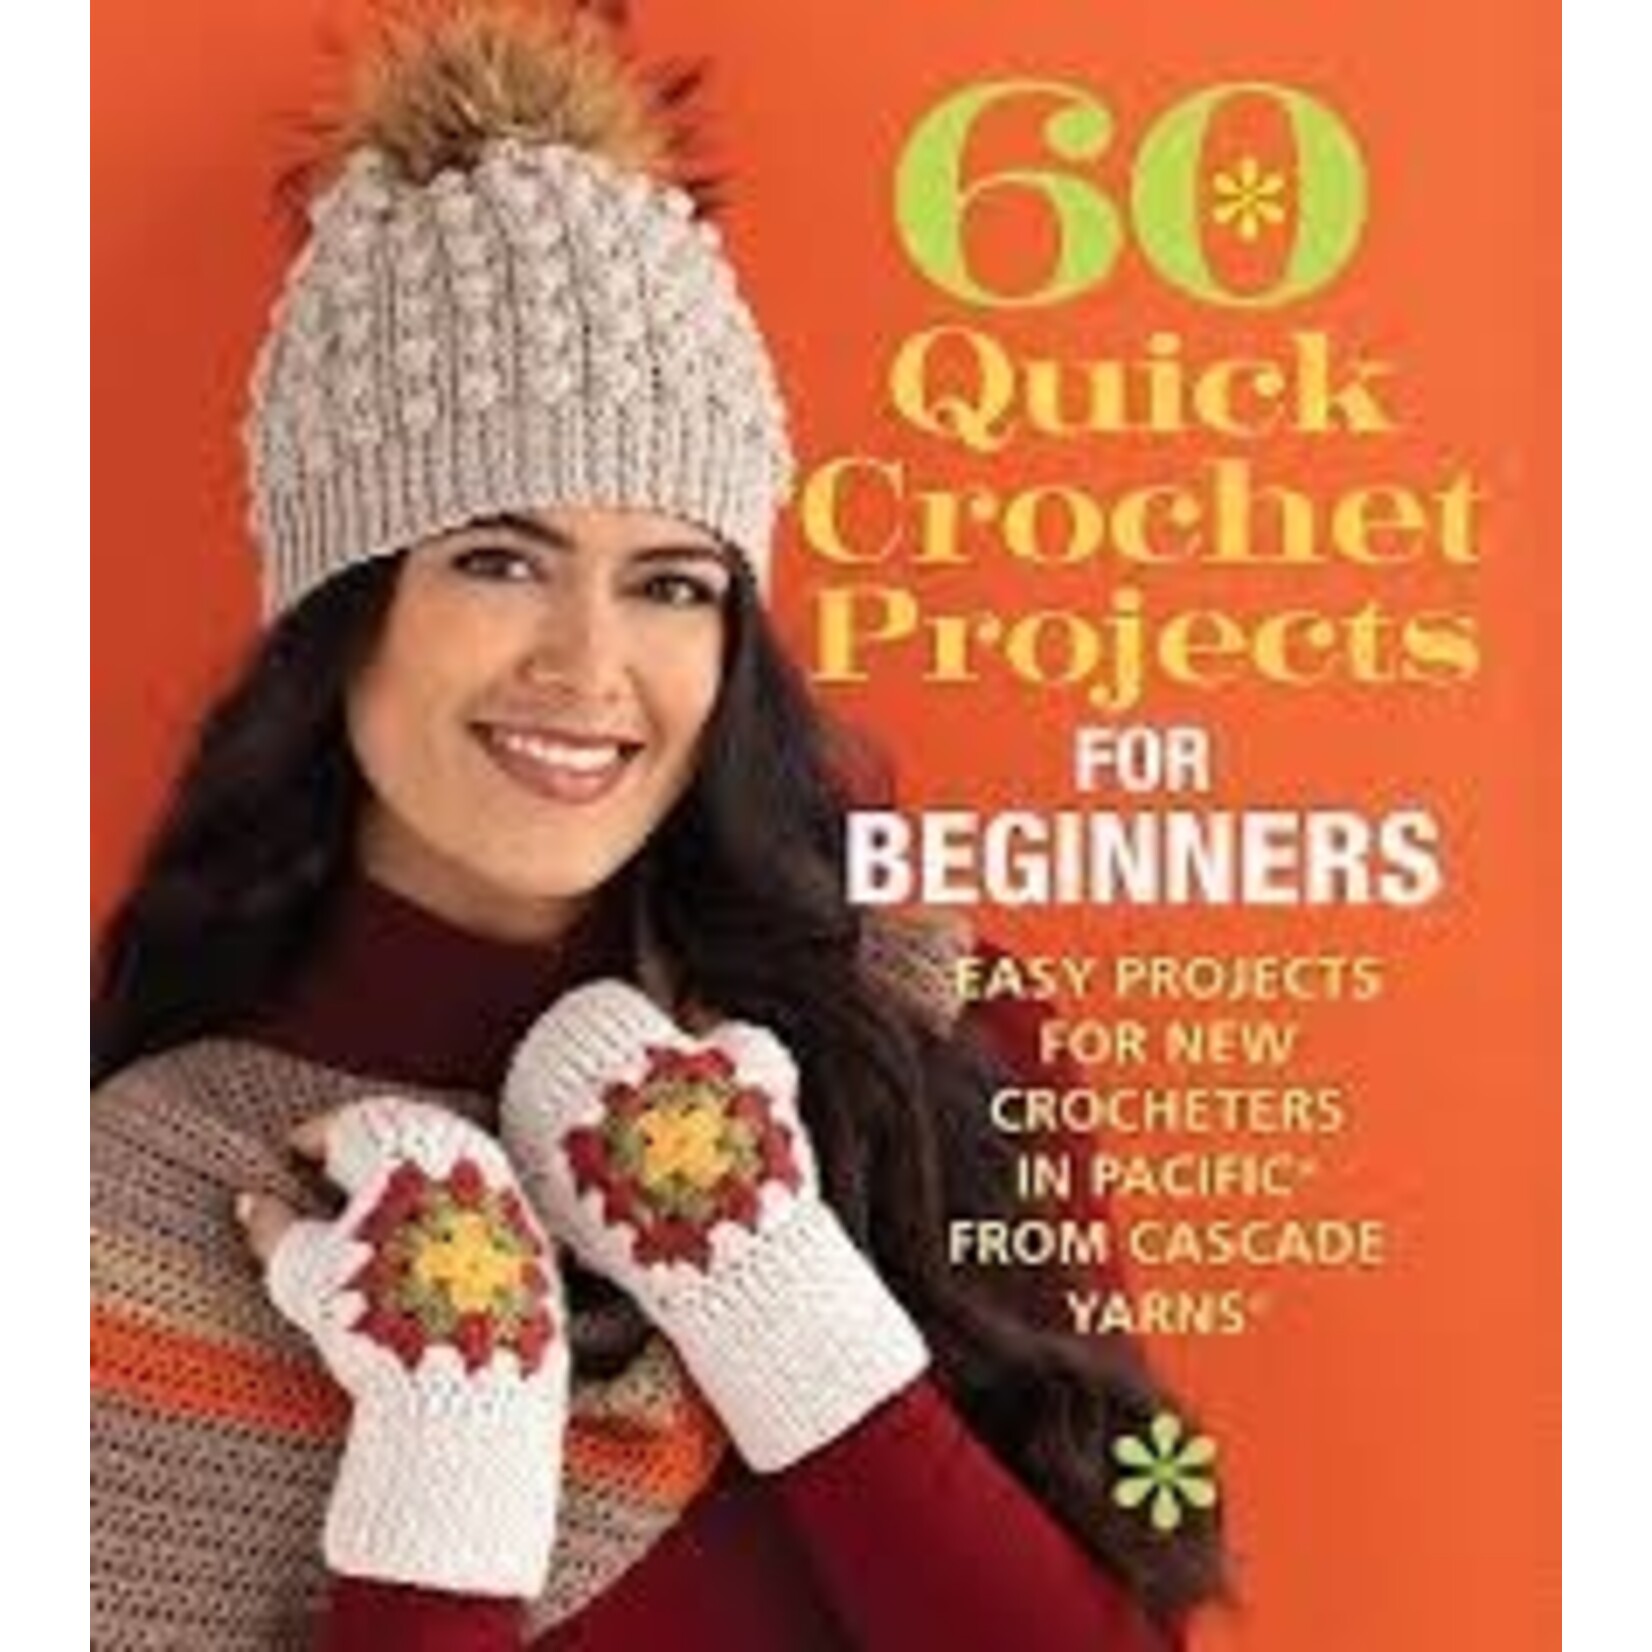 Cascade Yarns 60 Quick Crochet Projects for Beginners Pattern Book